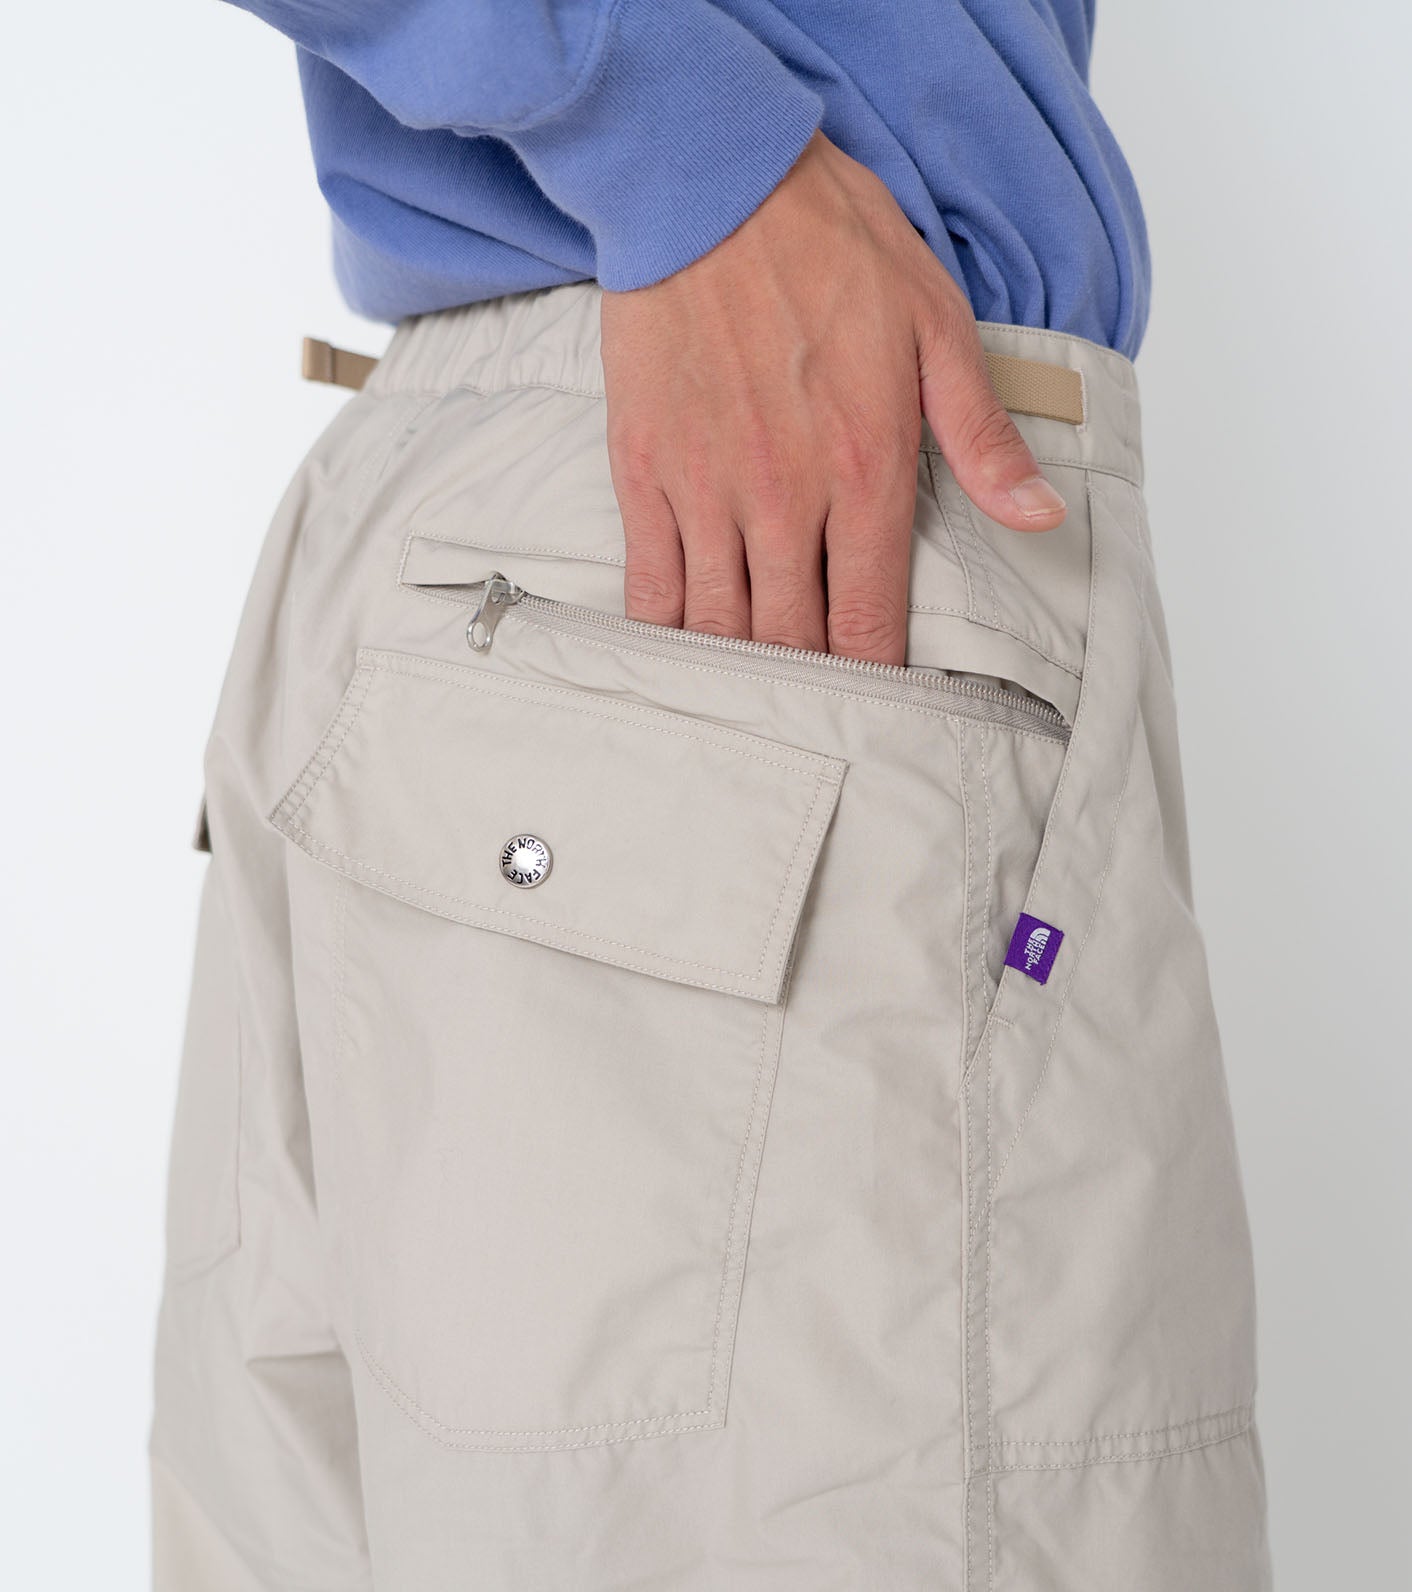 THE NORTH FACE PURPLE LABEL 65/35 Field Pants